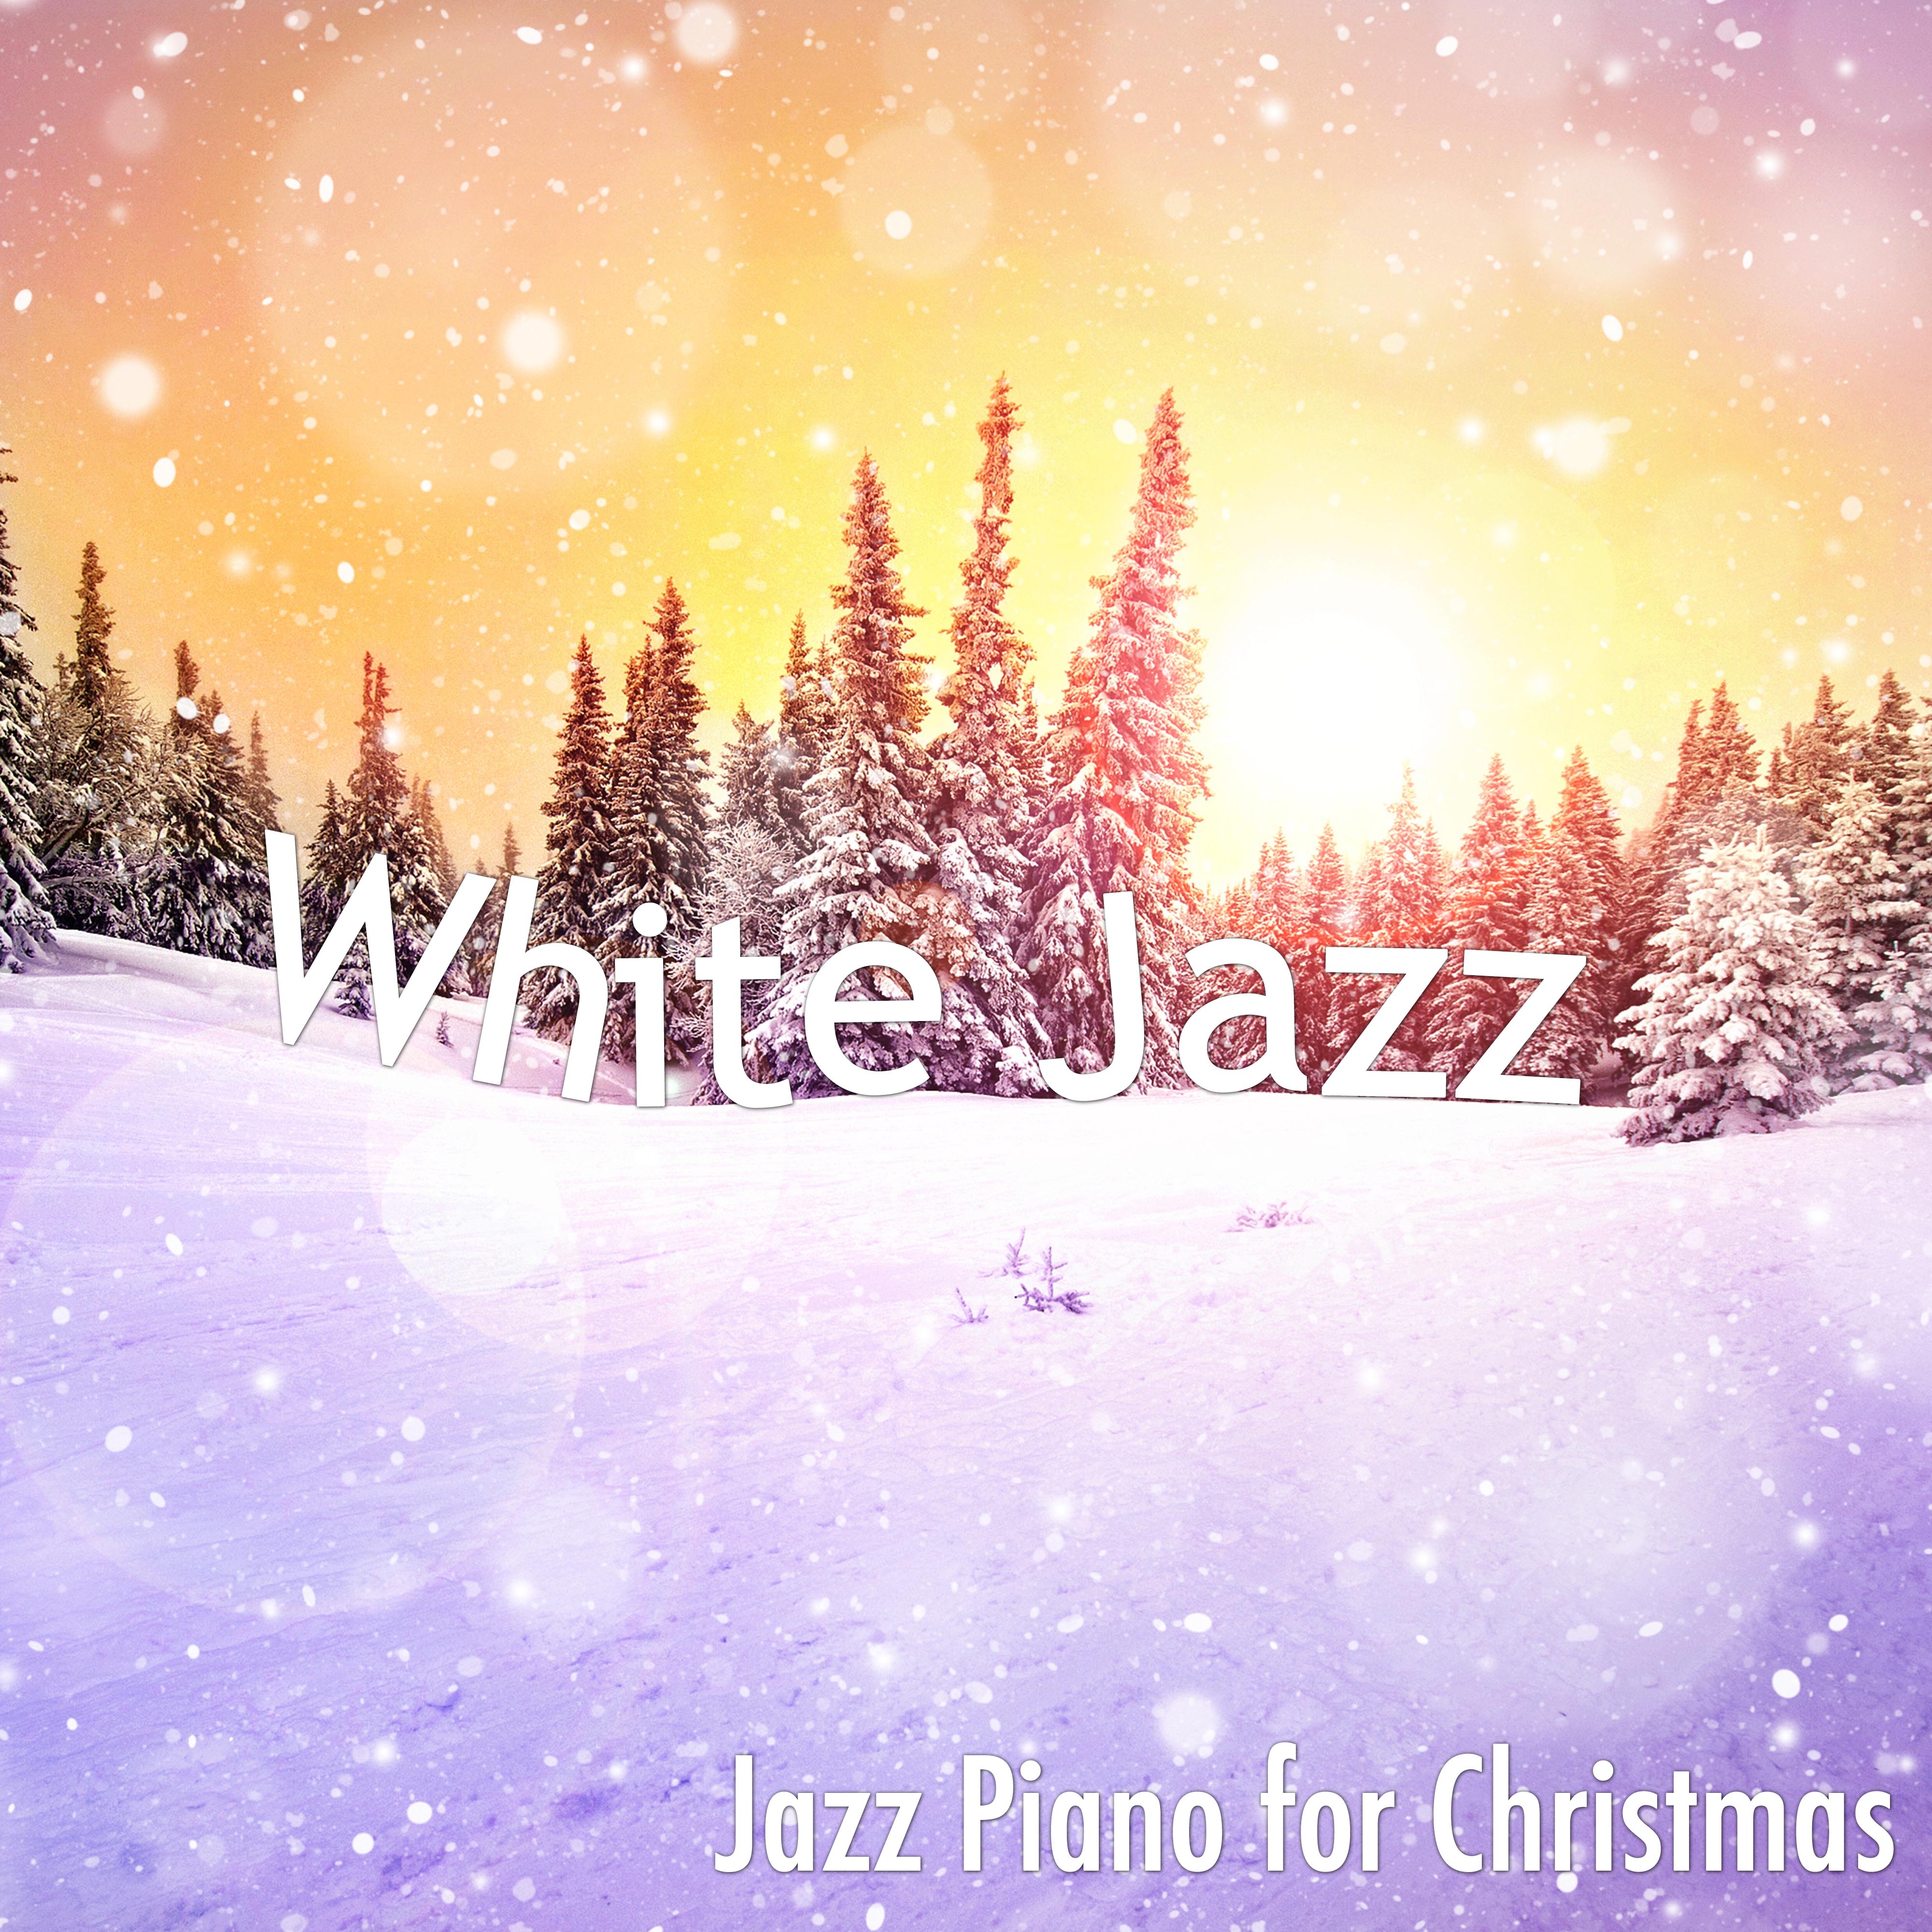 White Jazz: Mood Music for Christmas with Jazz Piano for Christmas Eve & Christmas Party